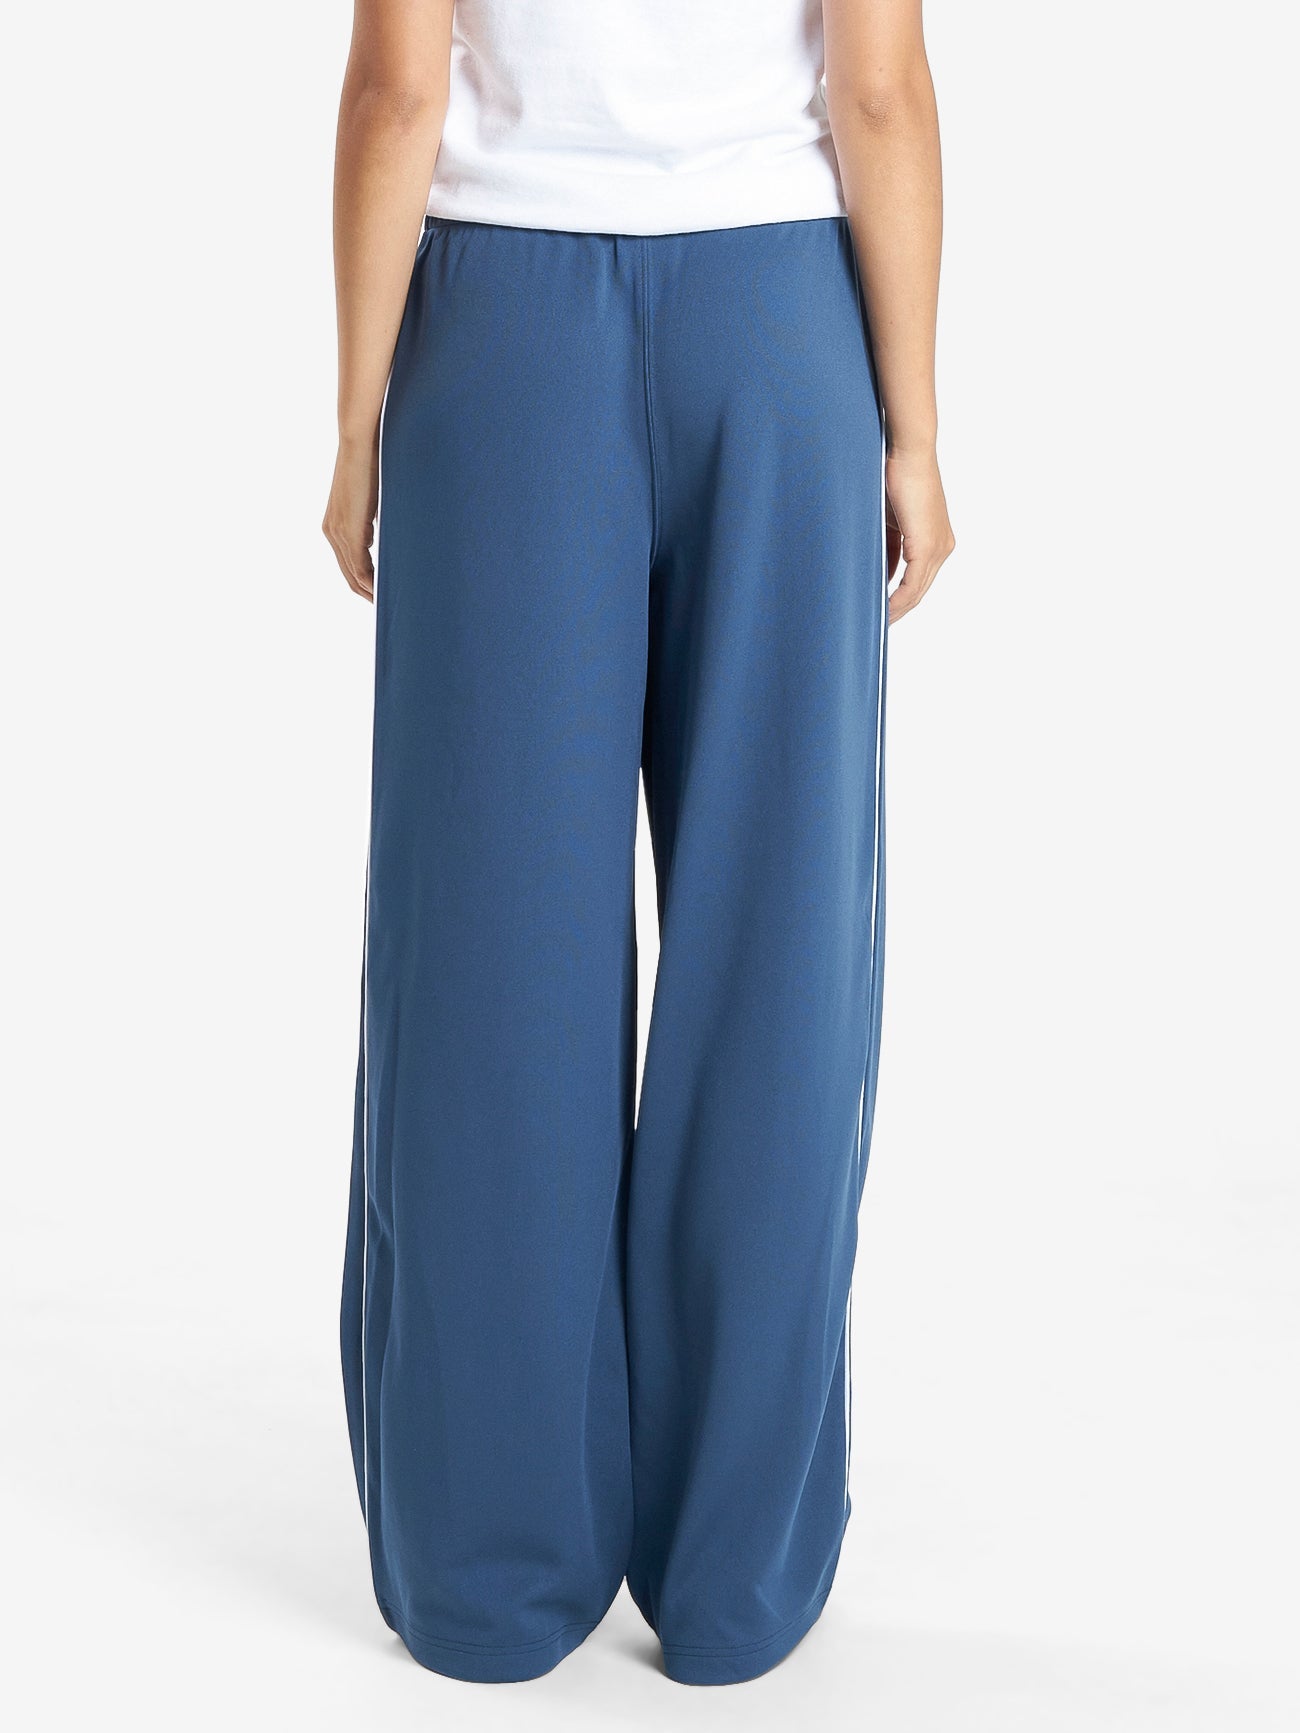 Sphere Tricot Track Pant - Ensign Blue 4